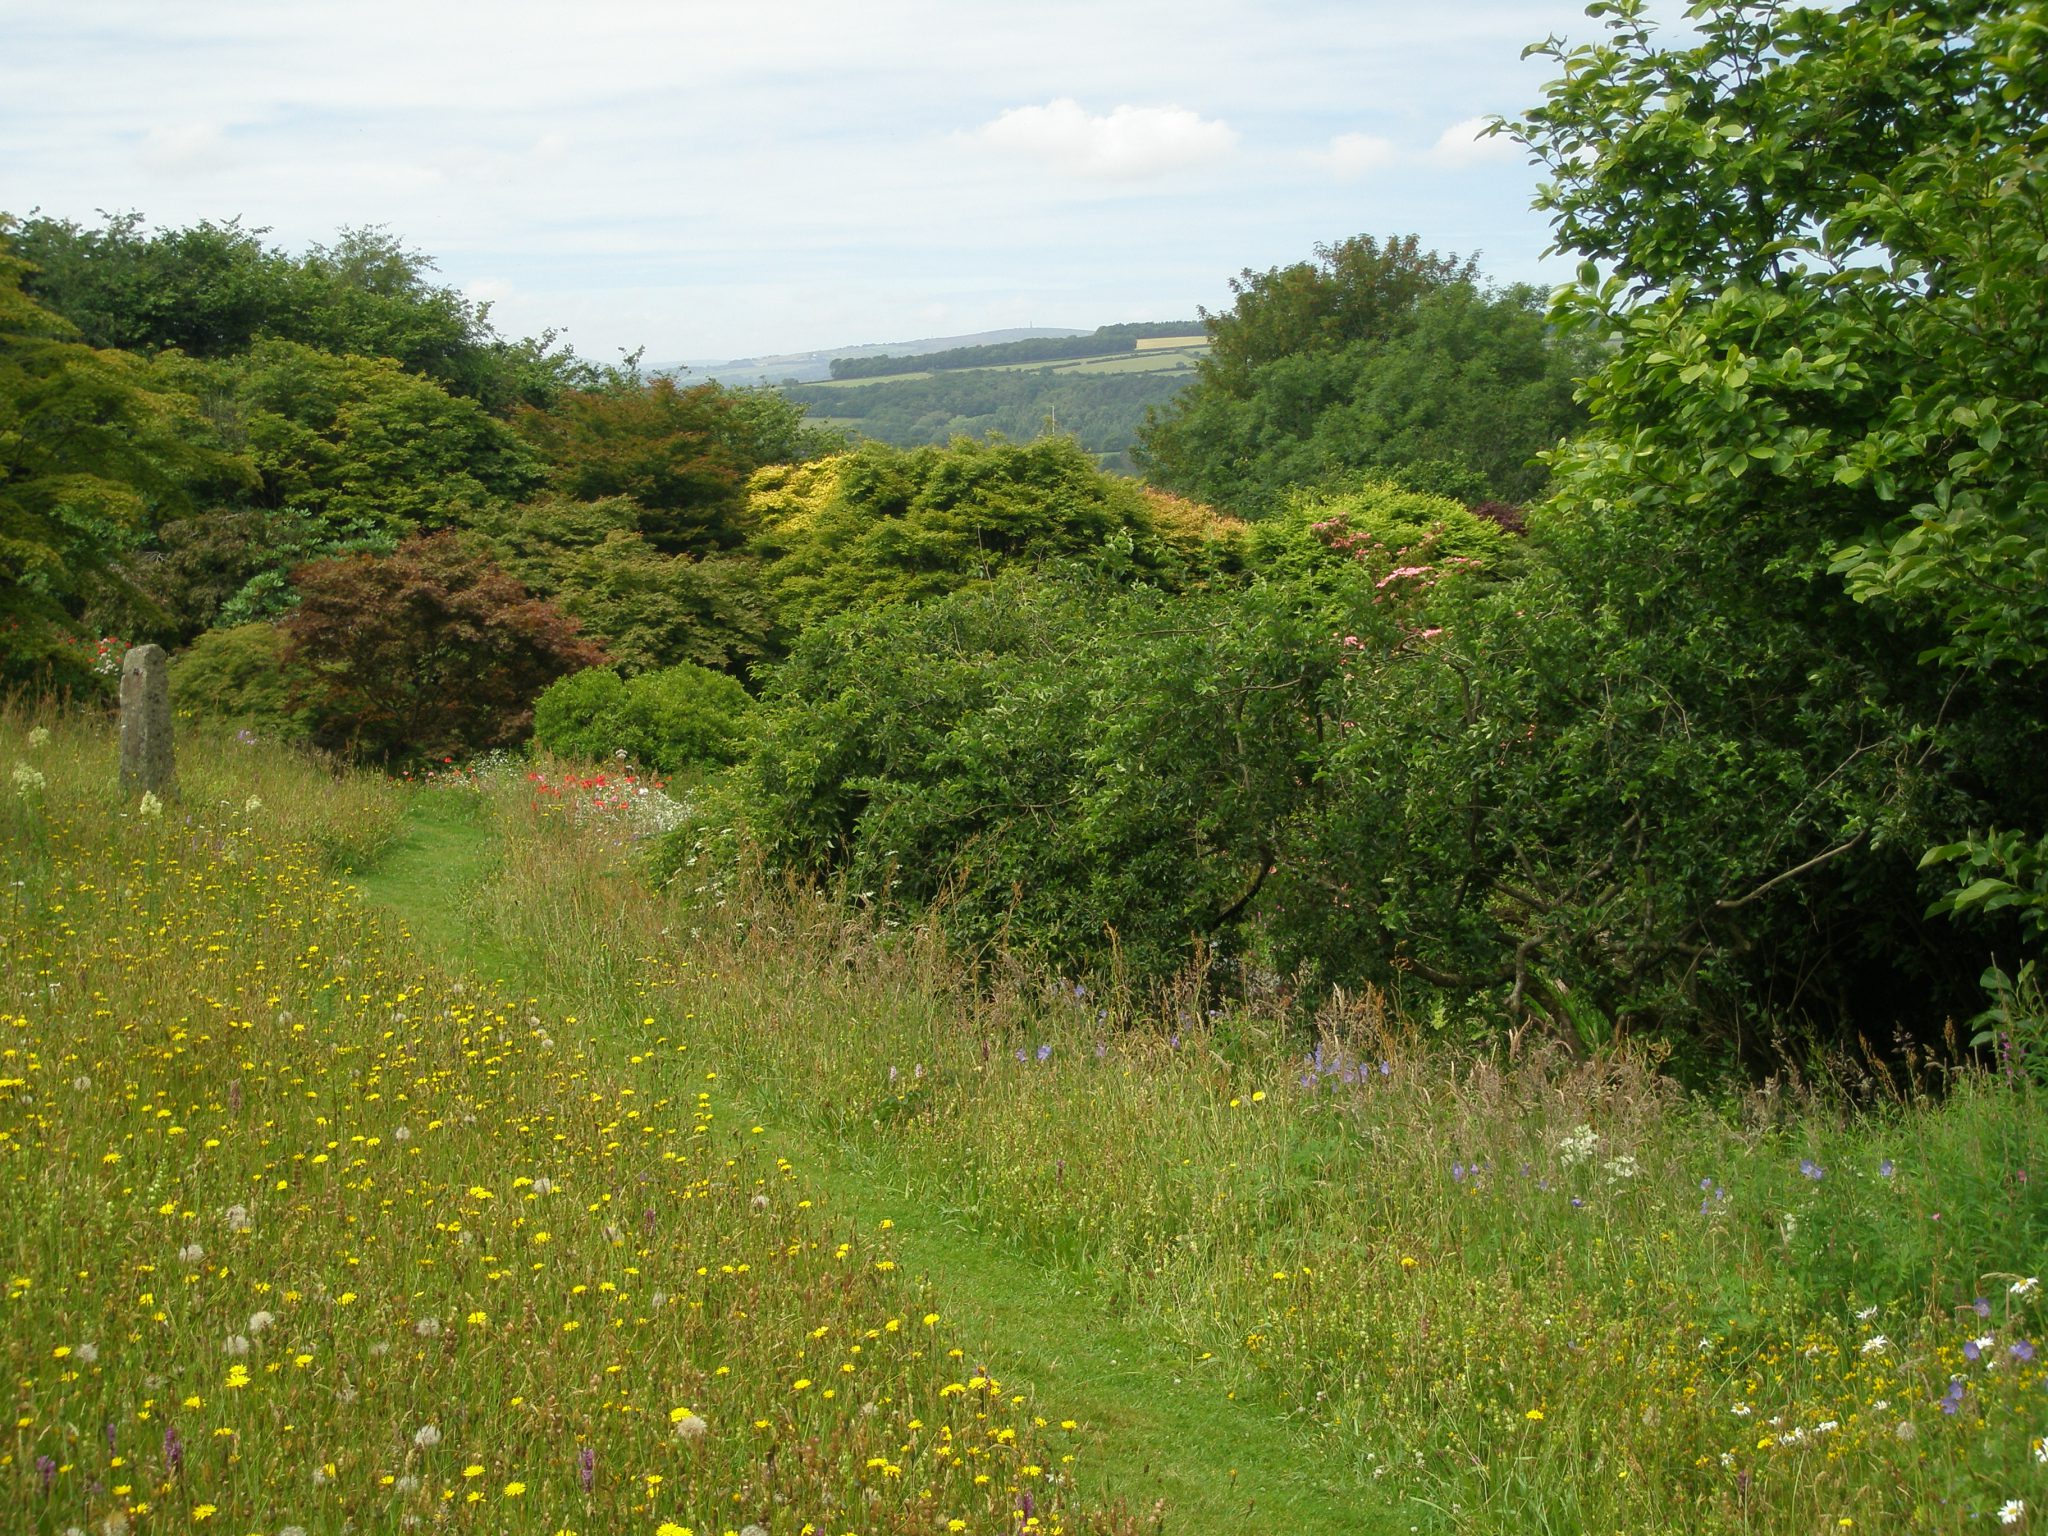 A path mown through the Wildflower Meadow leads toward the Acer Glade and Rill.